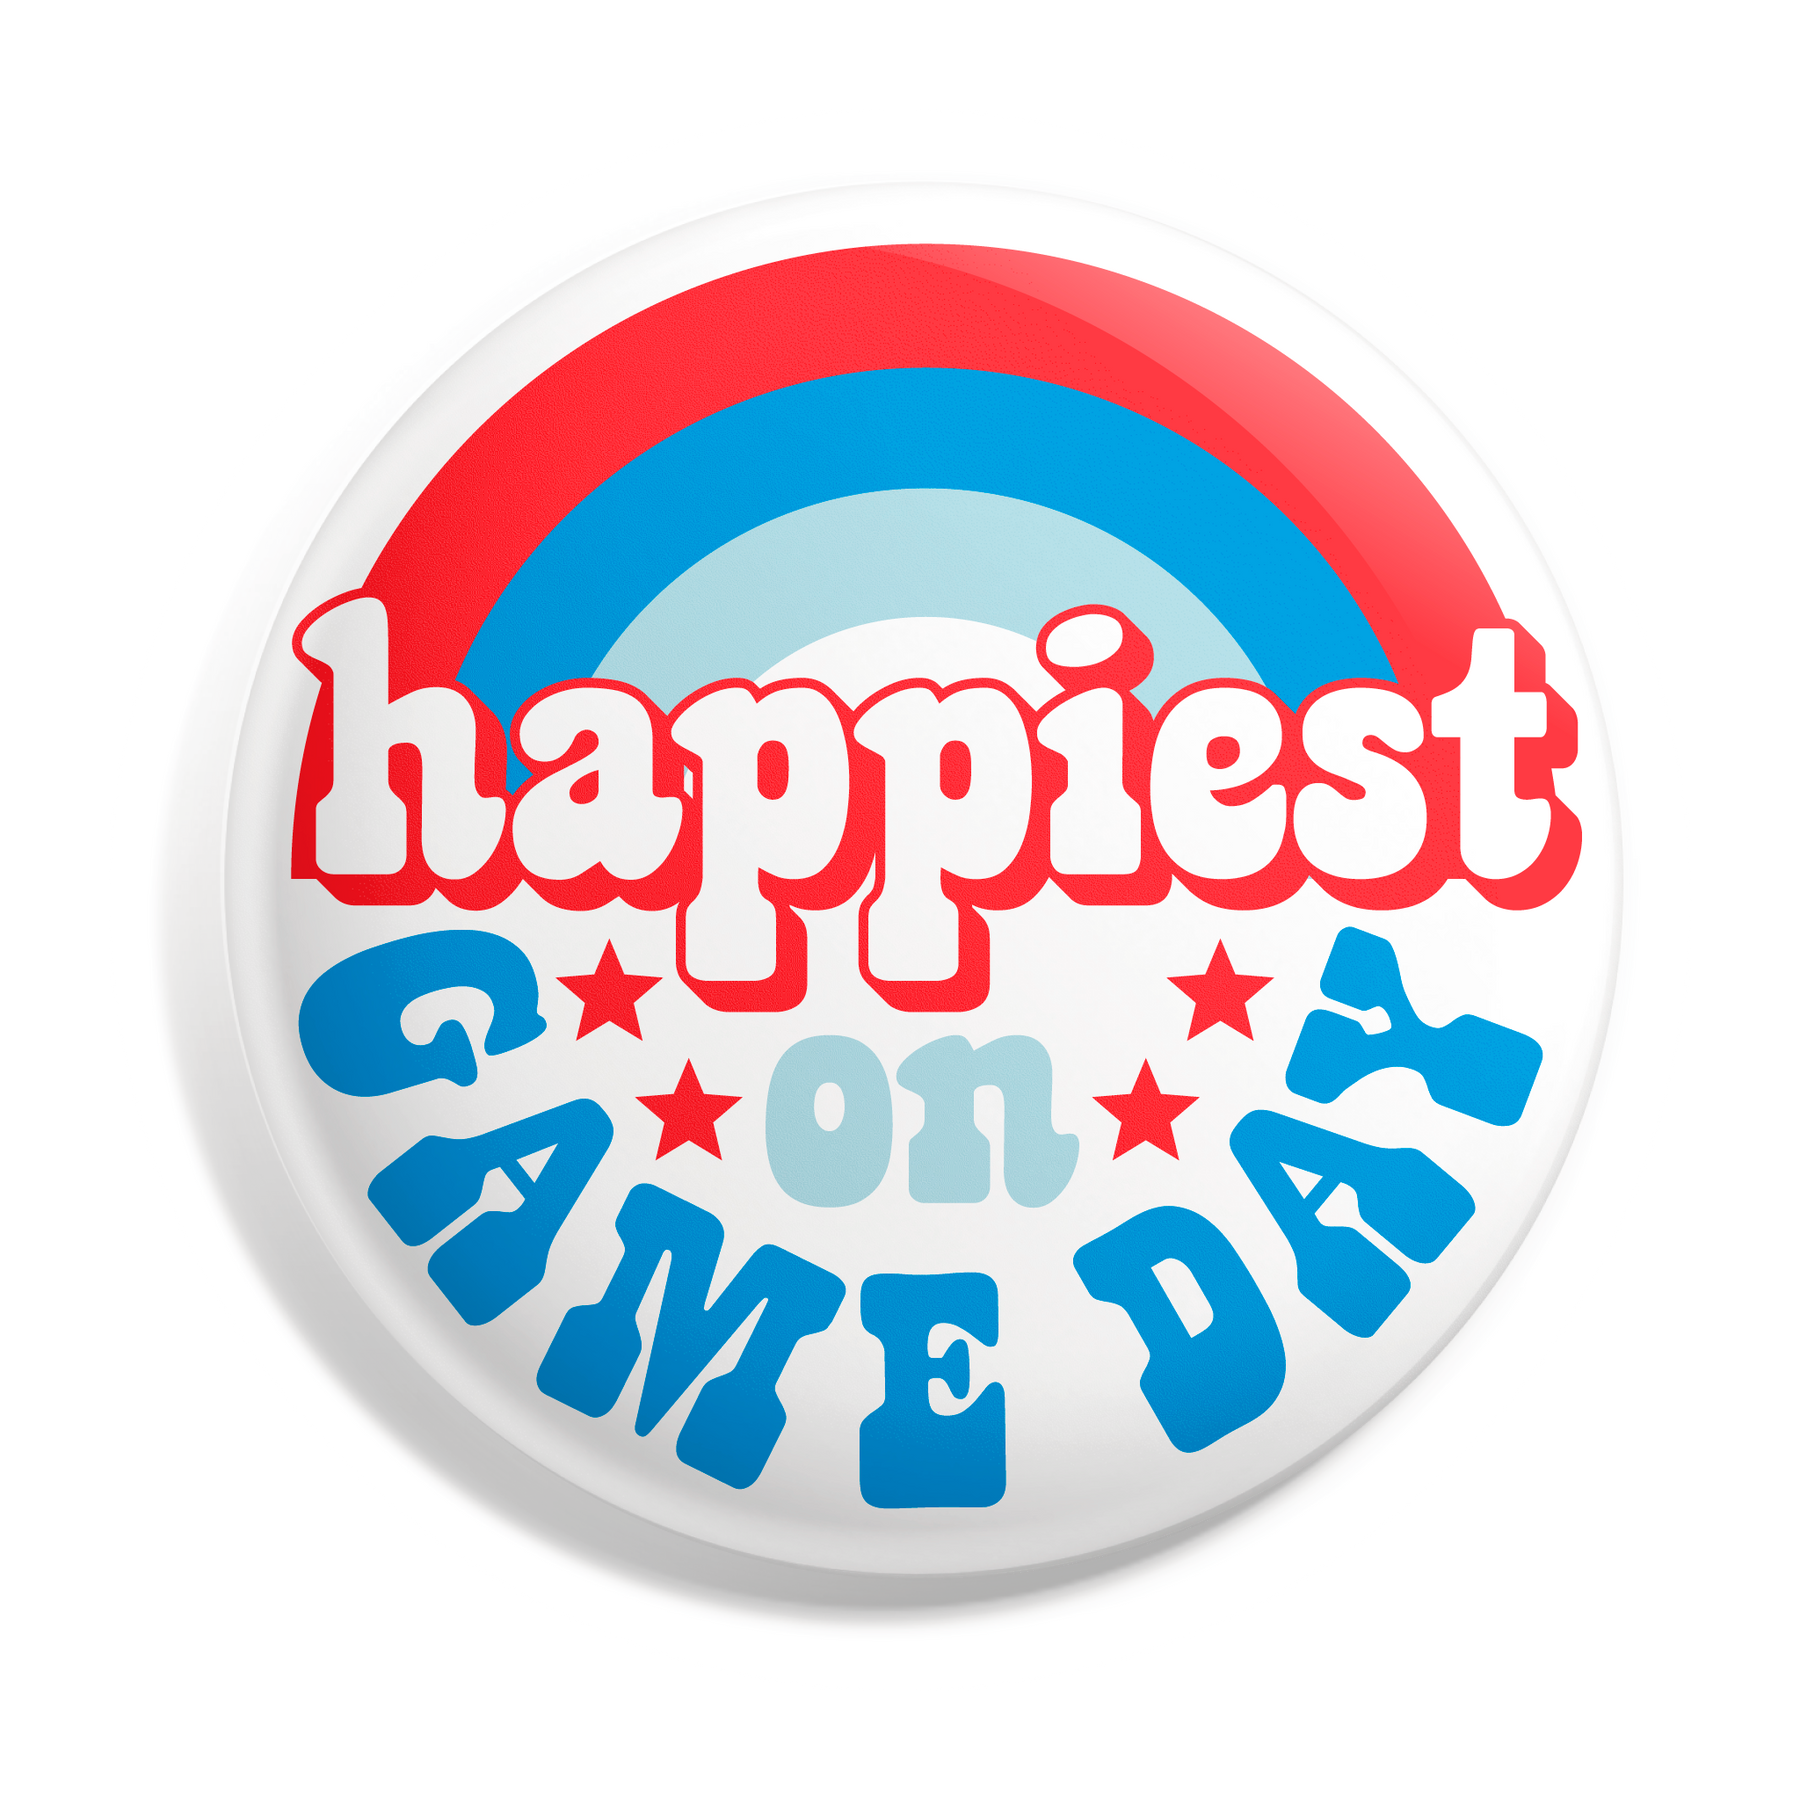 Ole Miss Happiest Gameday Button